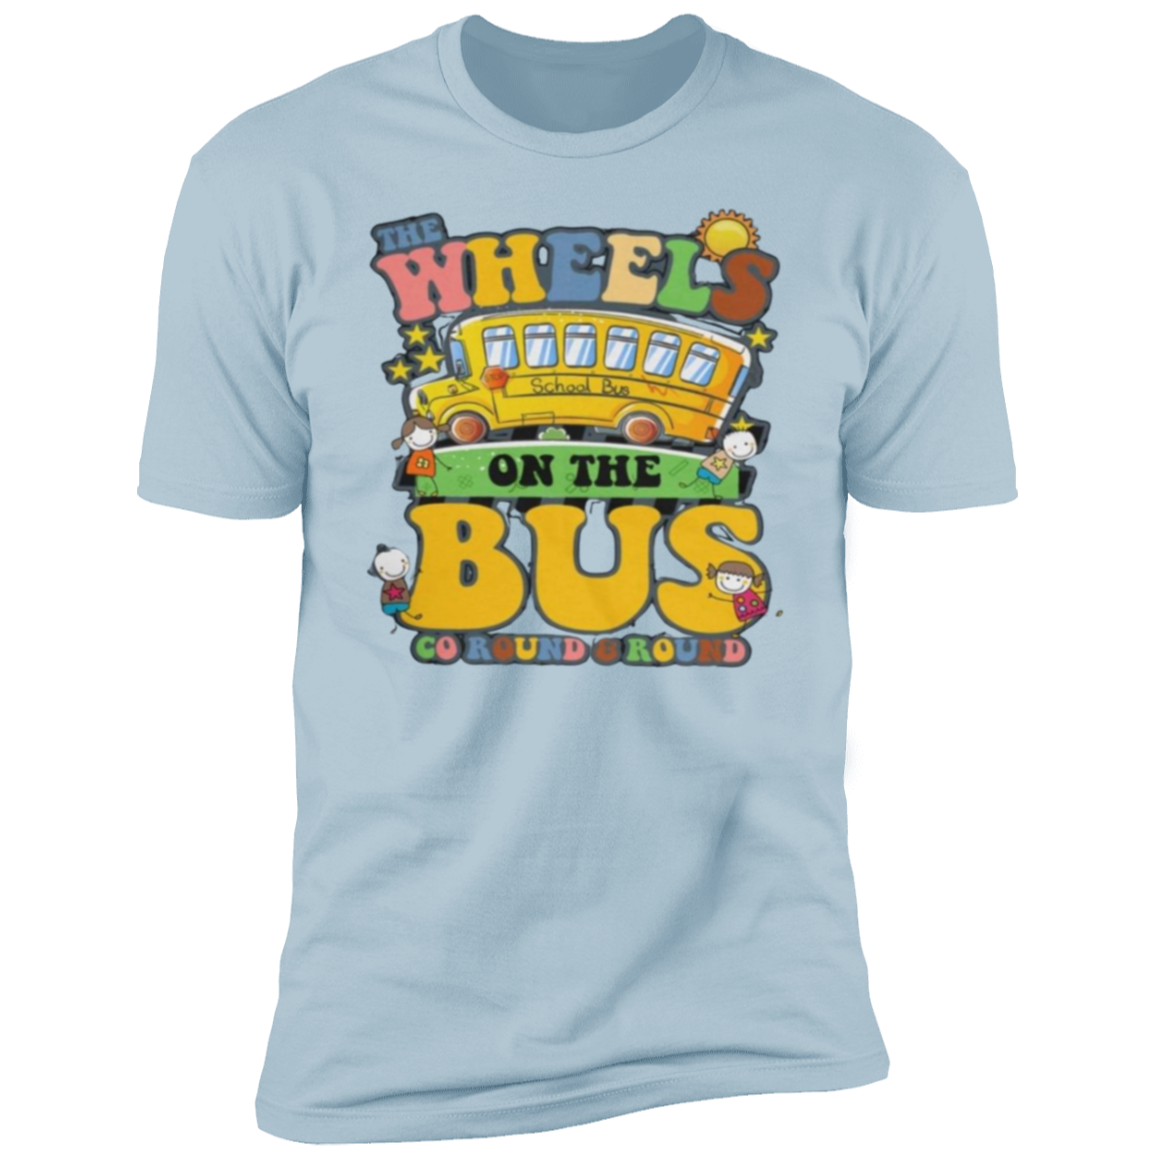 The Wheels on the Bus Tee